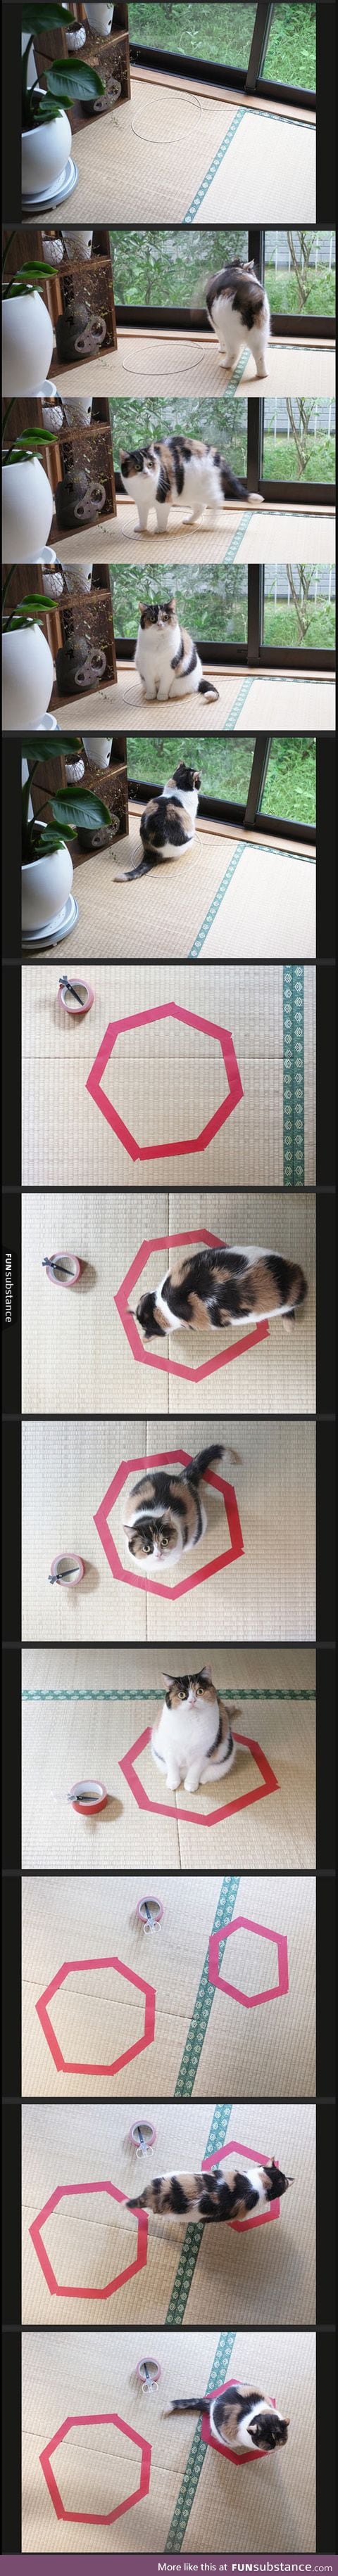 Trick your cat with a circle